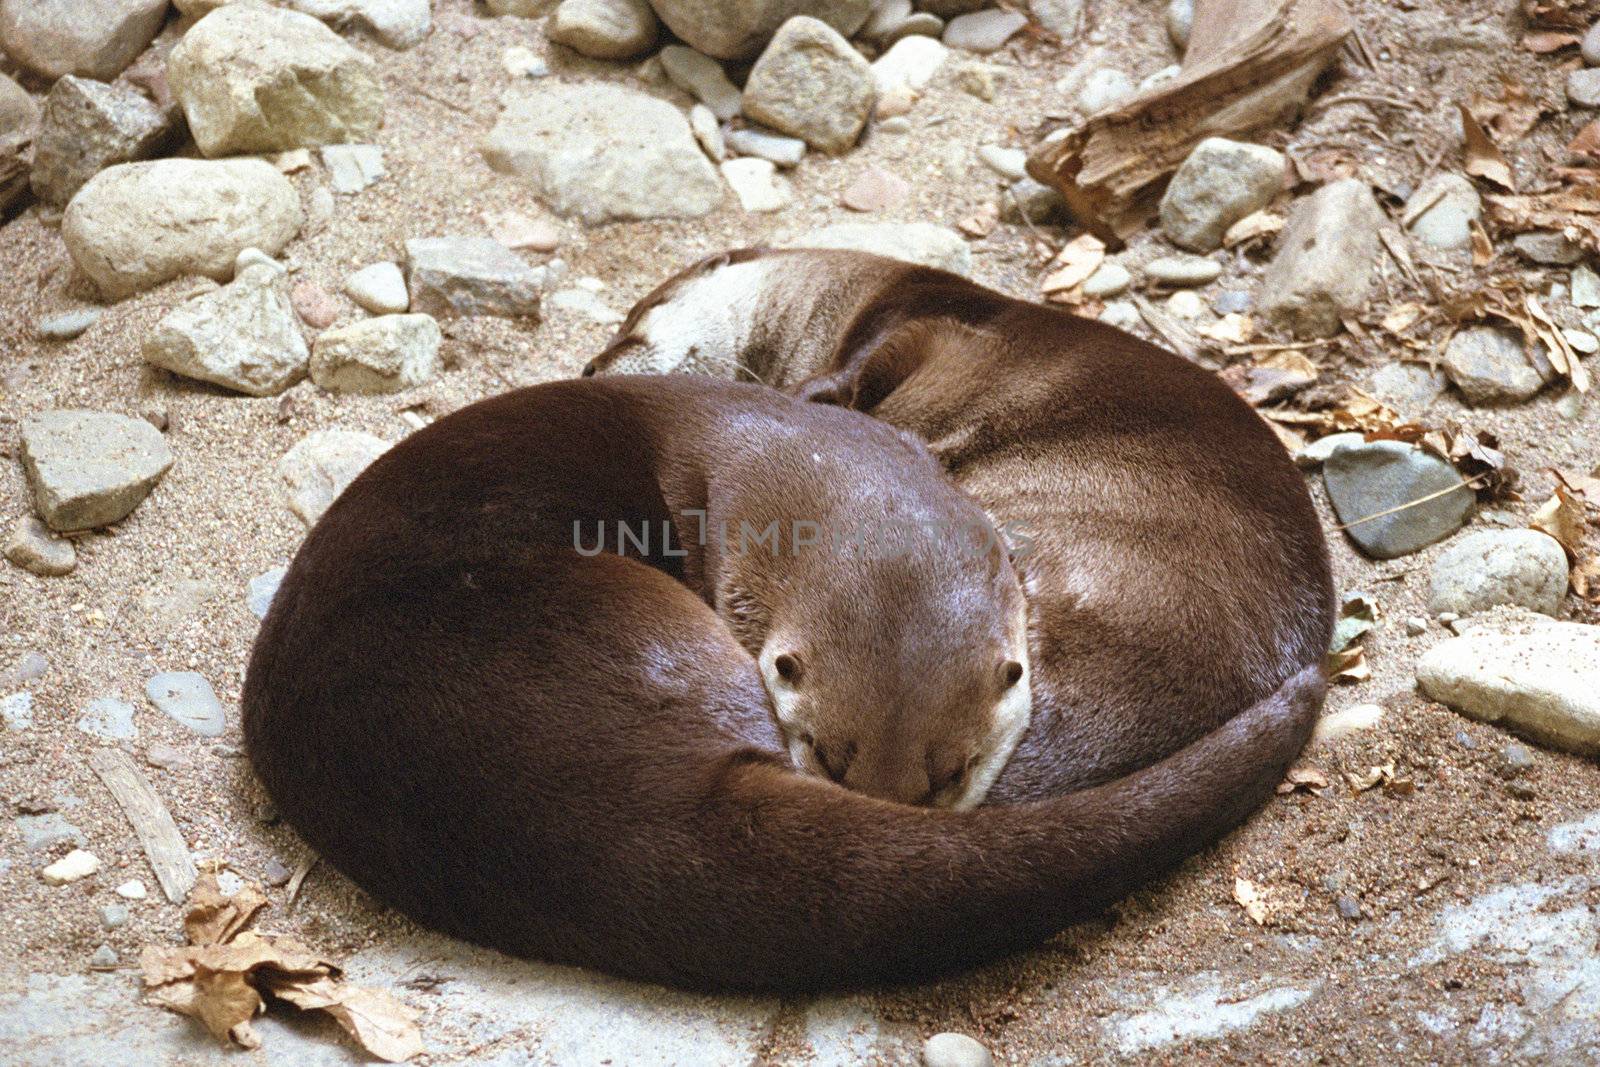 Two otter sleeping in a ying yang position on a rocky bed